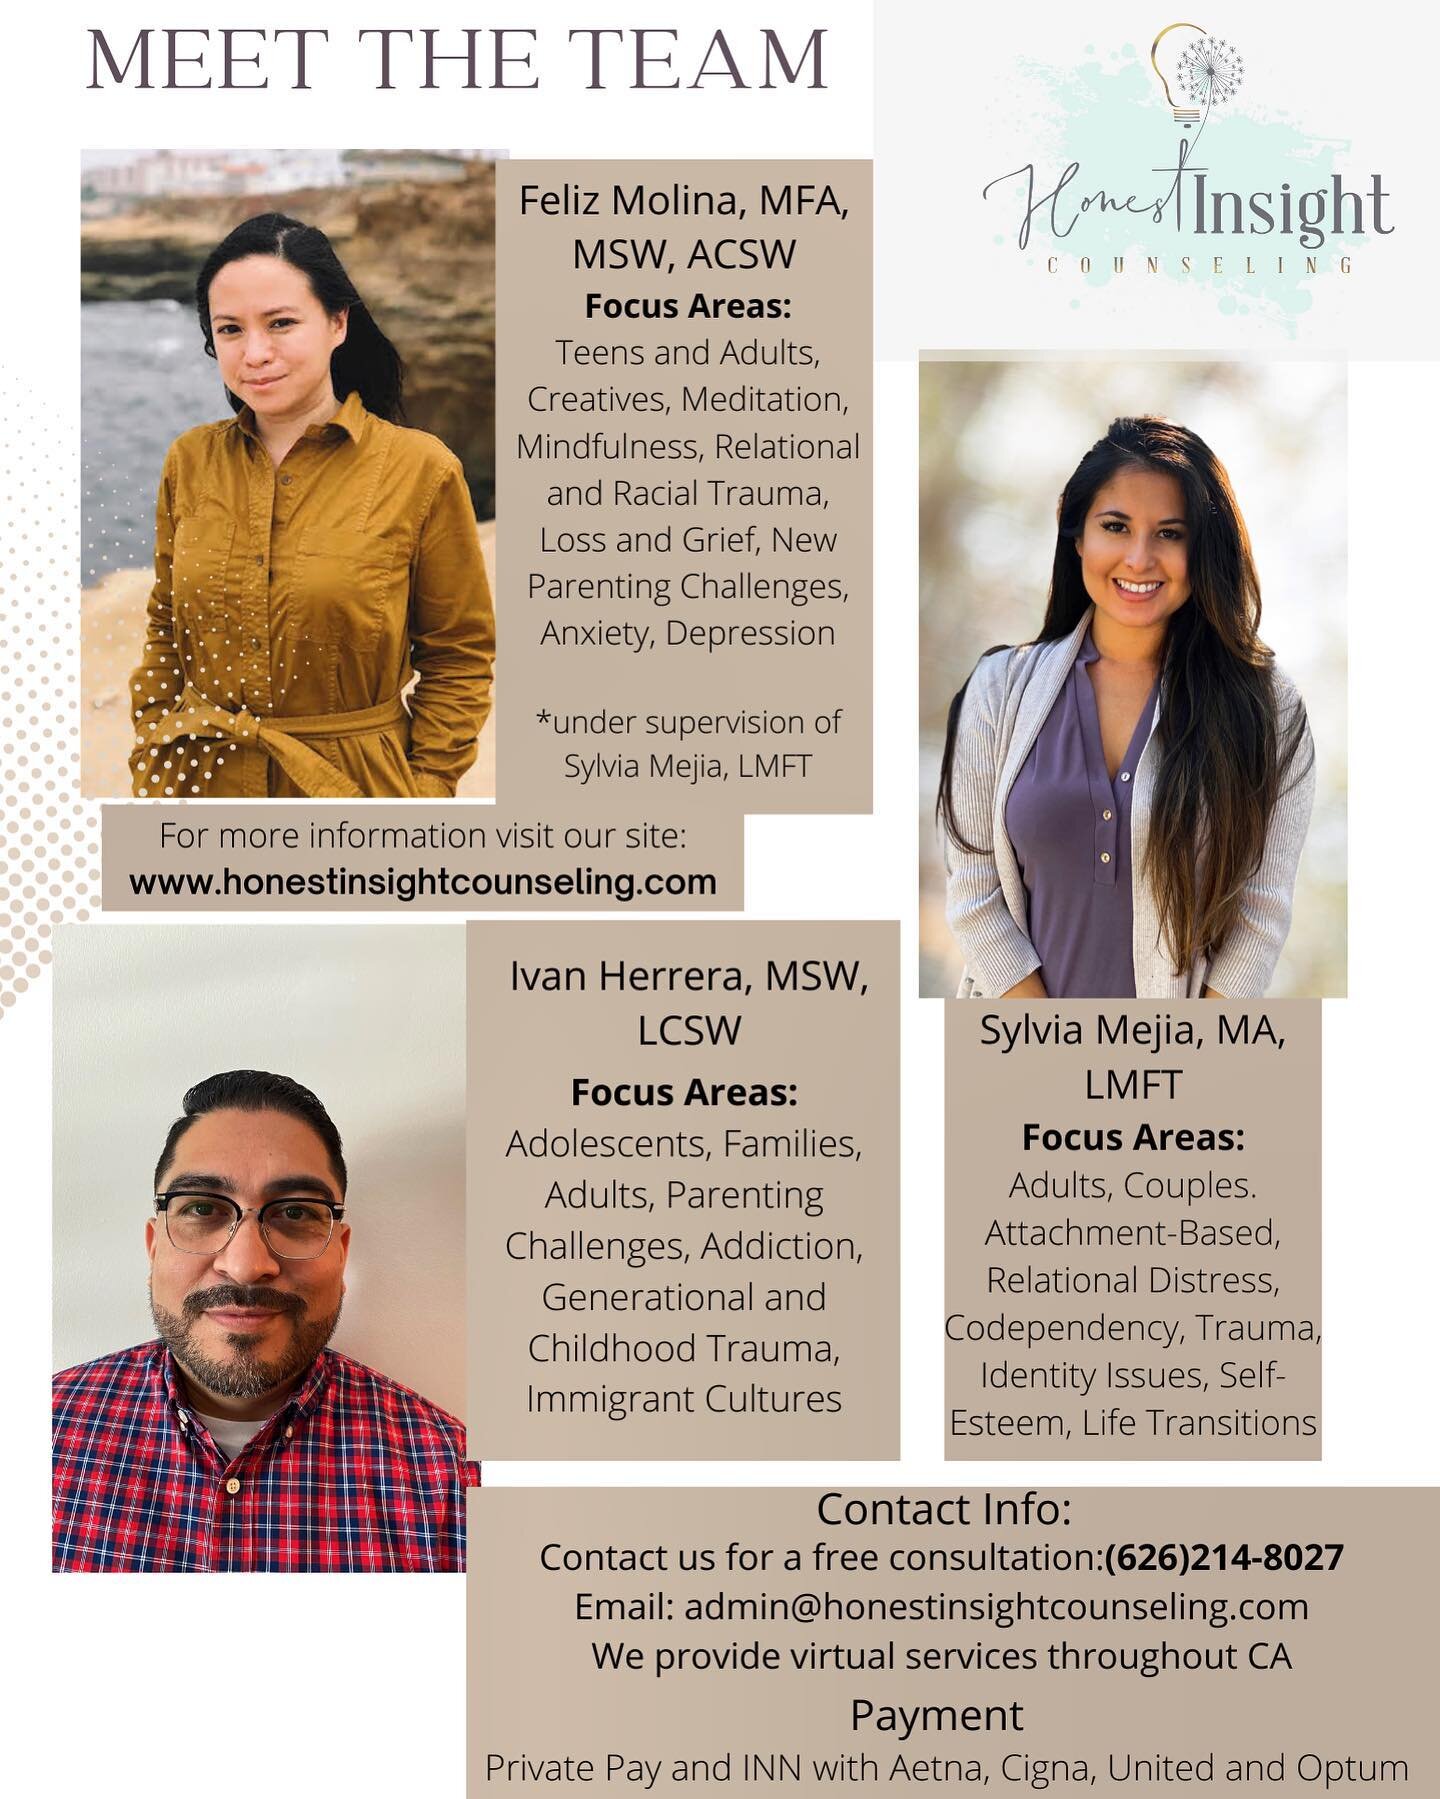 Meet our team ✨
Welcome to my two new therapists ✨
Accepting new clients
#therapy #therapist #psychology #latinxtherapy